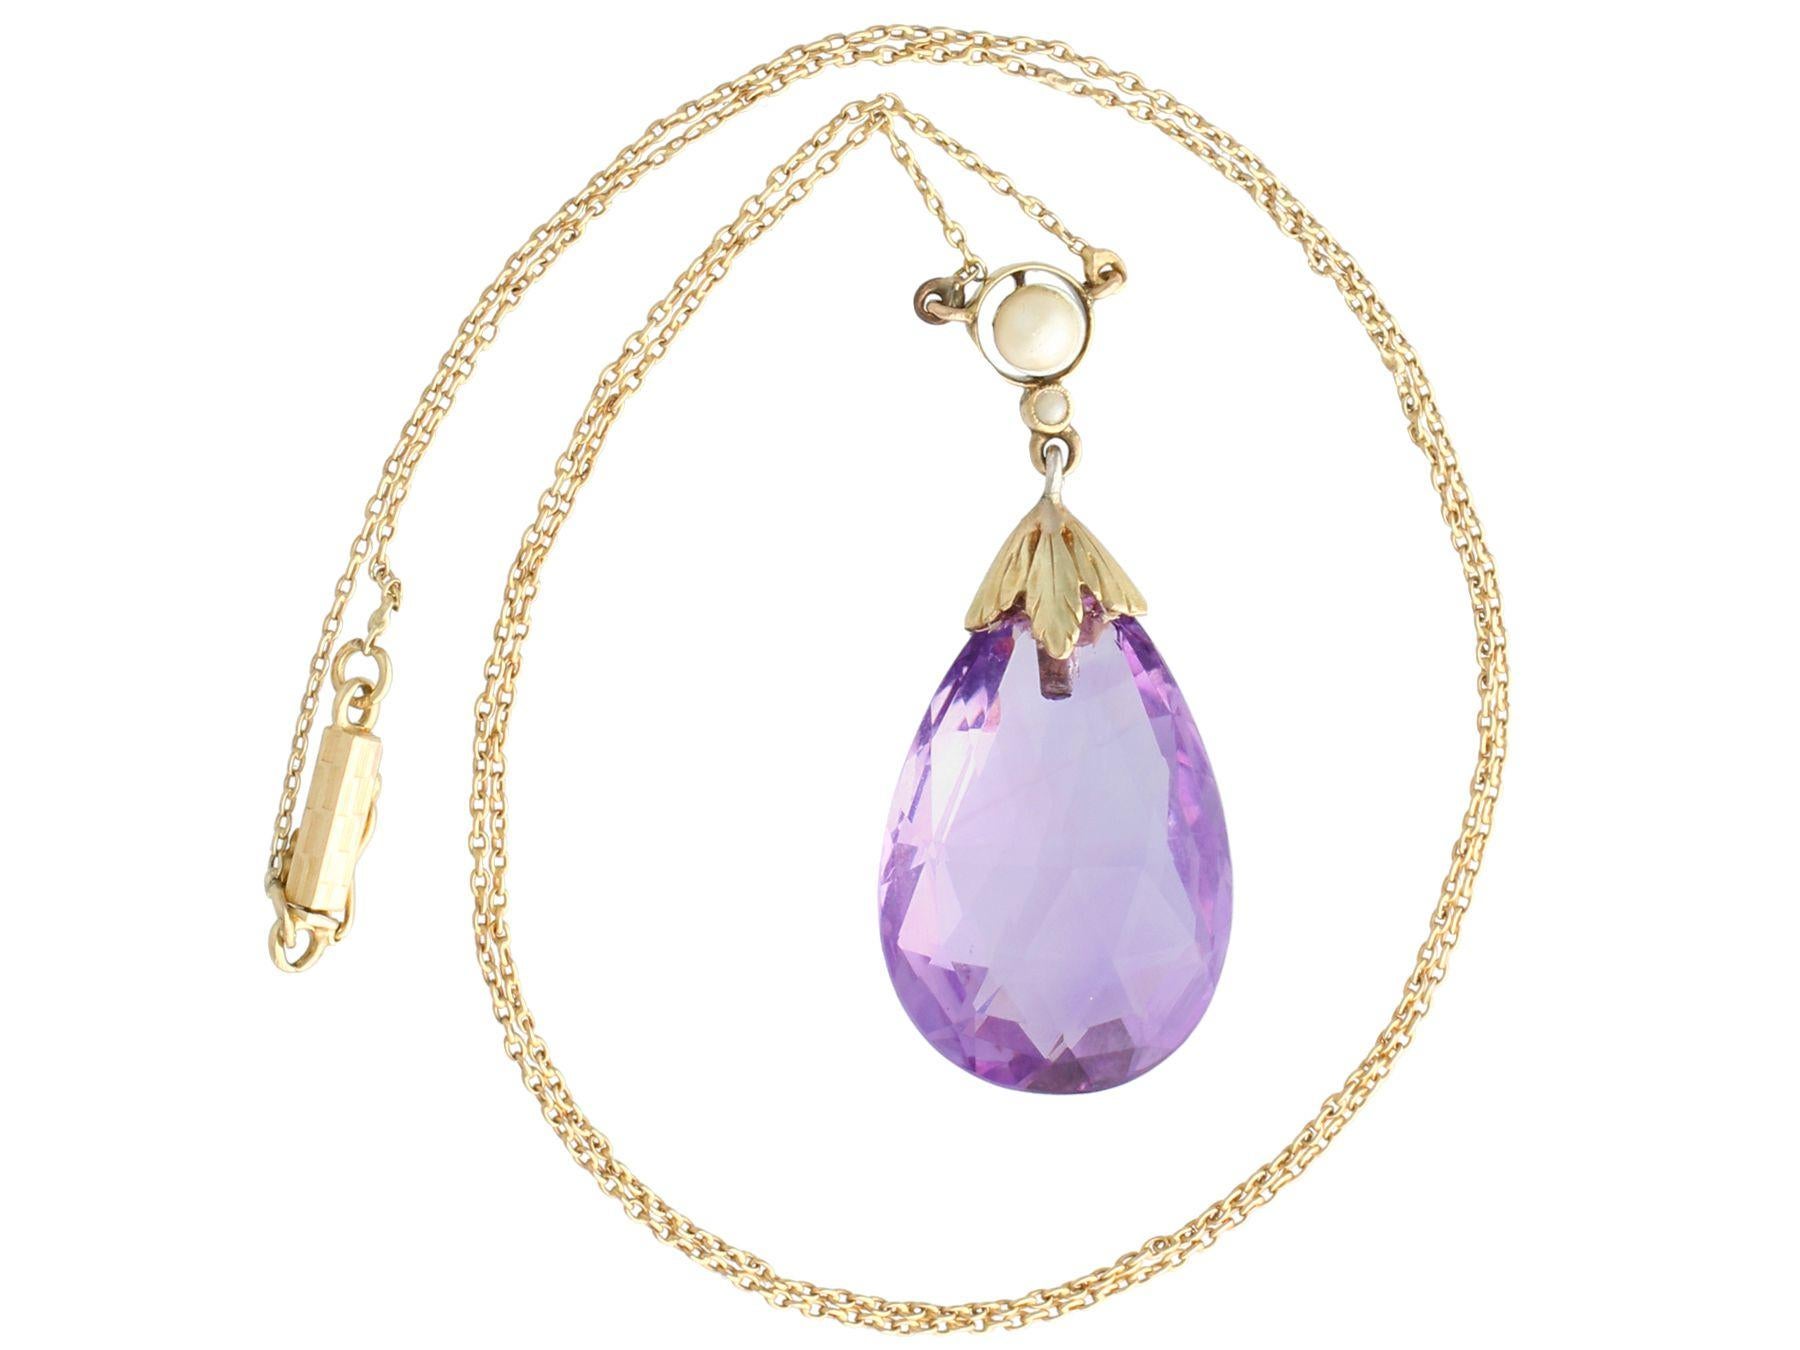 A fine and impressive antique 16.21 carat amethyst and seed pearl, 14 karat yellow gold necklace; part of our diverse antique jewelry and estate jewelry collections.

This fine and impressive amethyst drop necklace has been crafted in 14k yellow